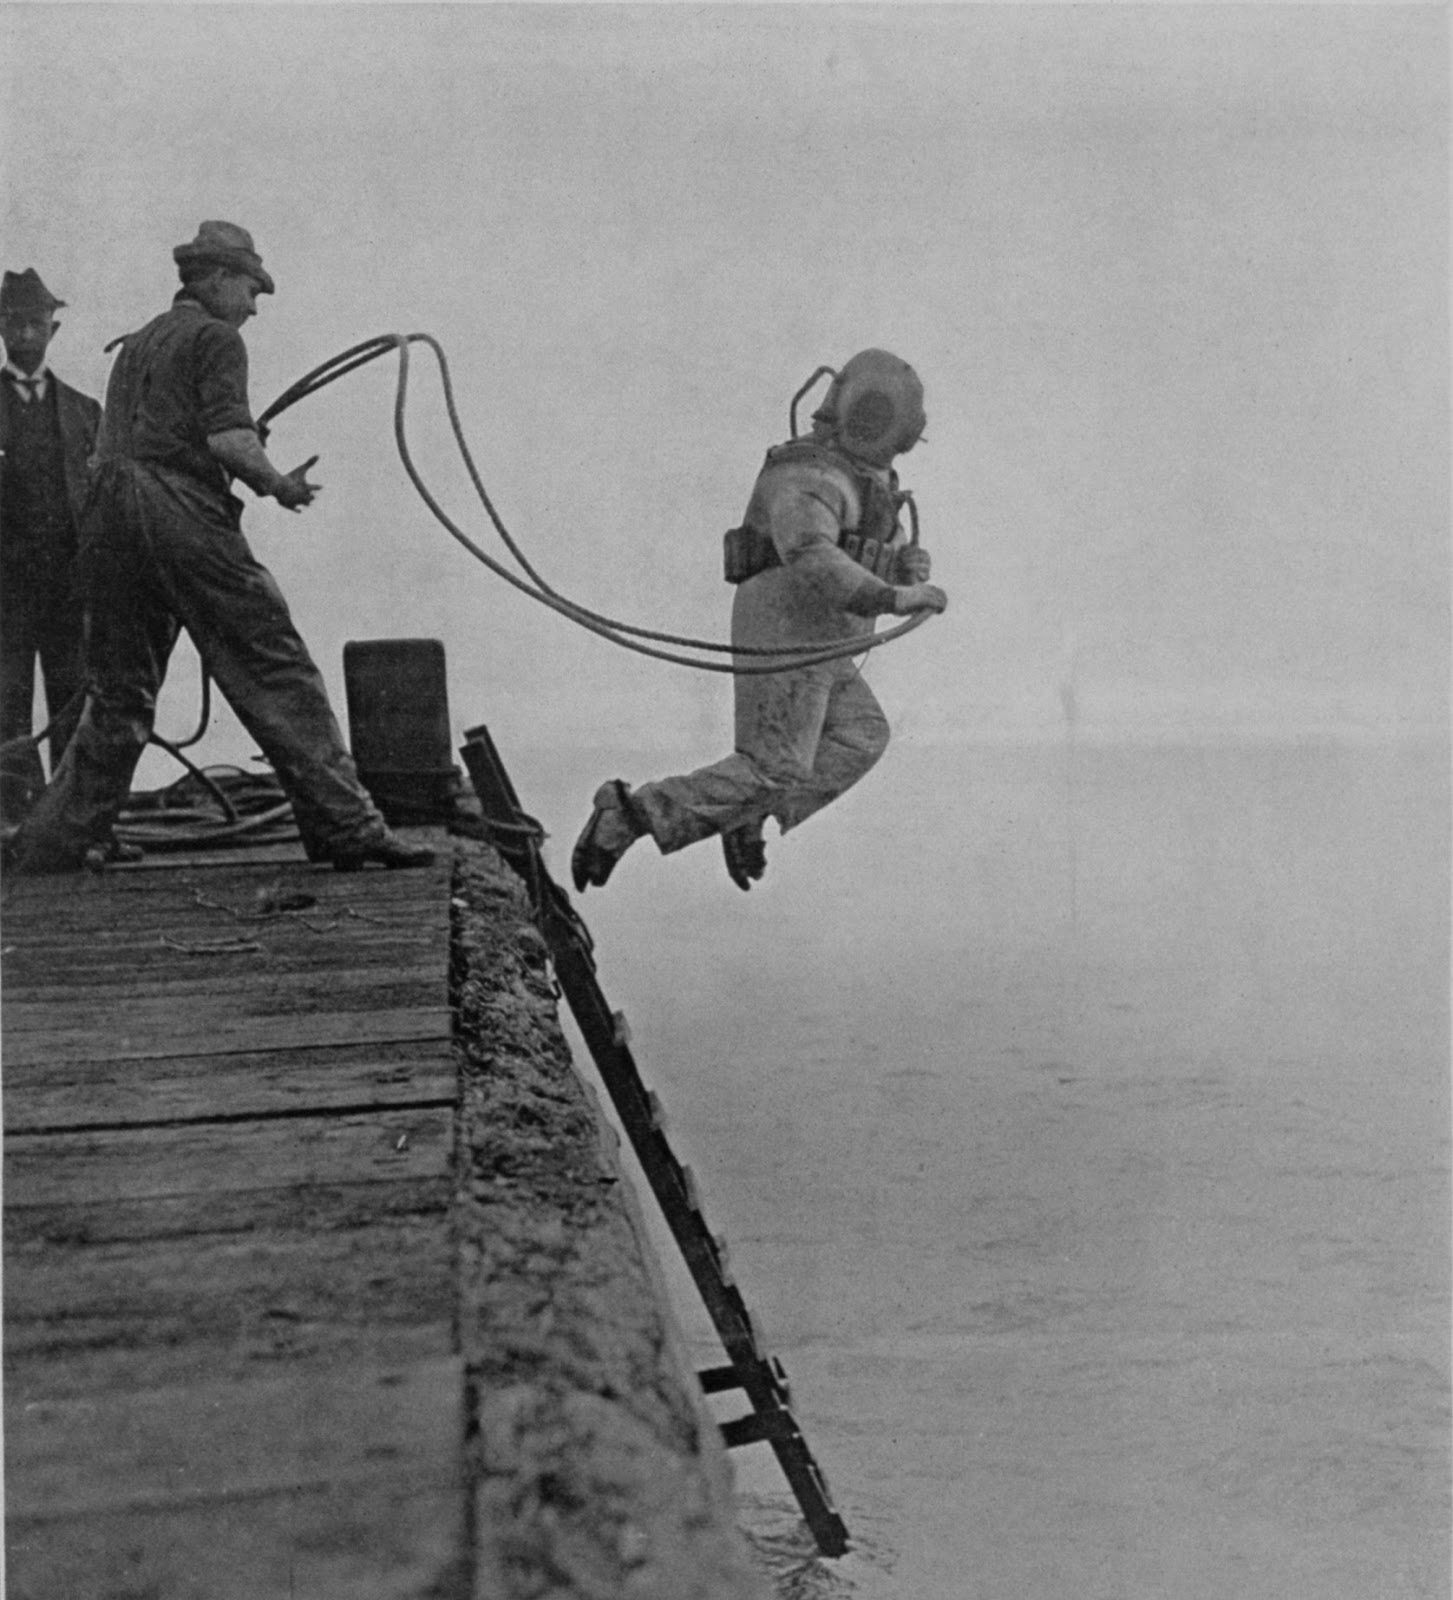 36 Amazing Historical Pictures. #9 Is Unbelievable - A deep sea diver is captured mid-jump. The cover of Scientific American Supplement on October 23, 1915